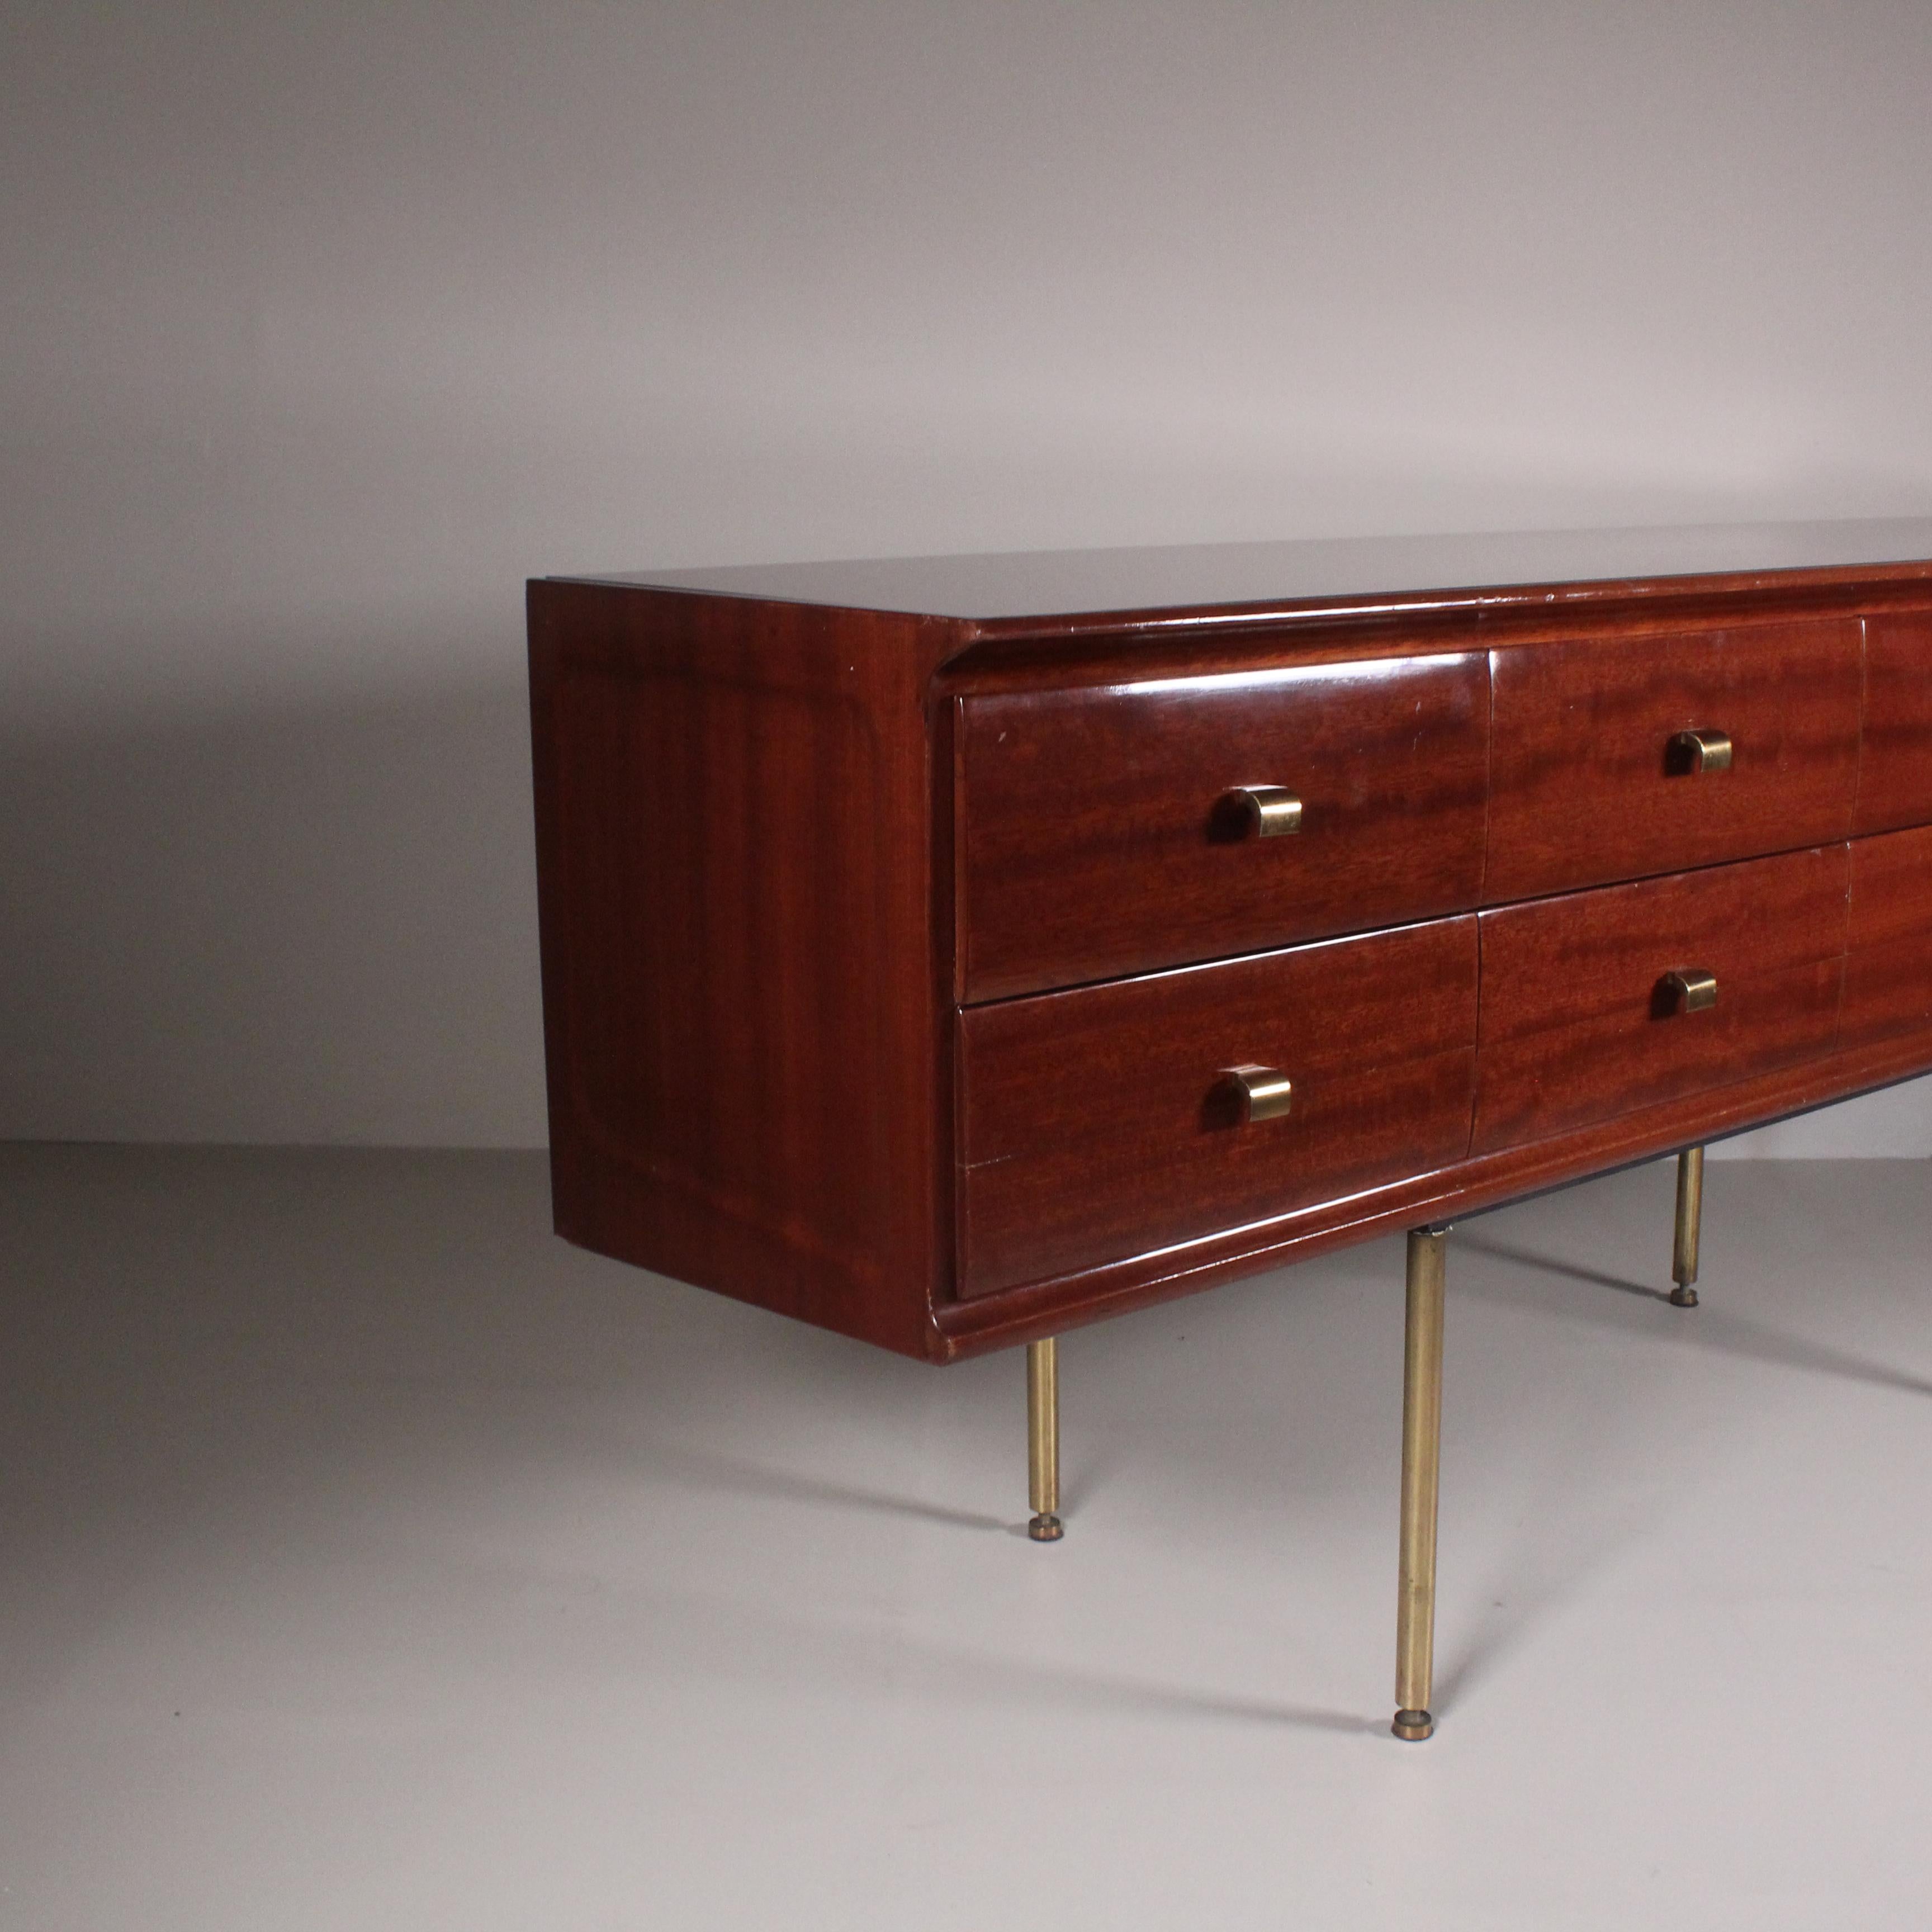 This chest of drawers by Osvaldo Borsani, dating from the 1950s, embodies the elegance and innovation of Italian design at the time. Featuring a combination of fine materials, such as brass and burgundy-colored glass, this creation expresses